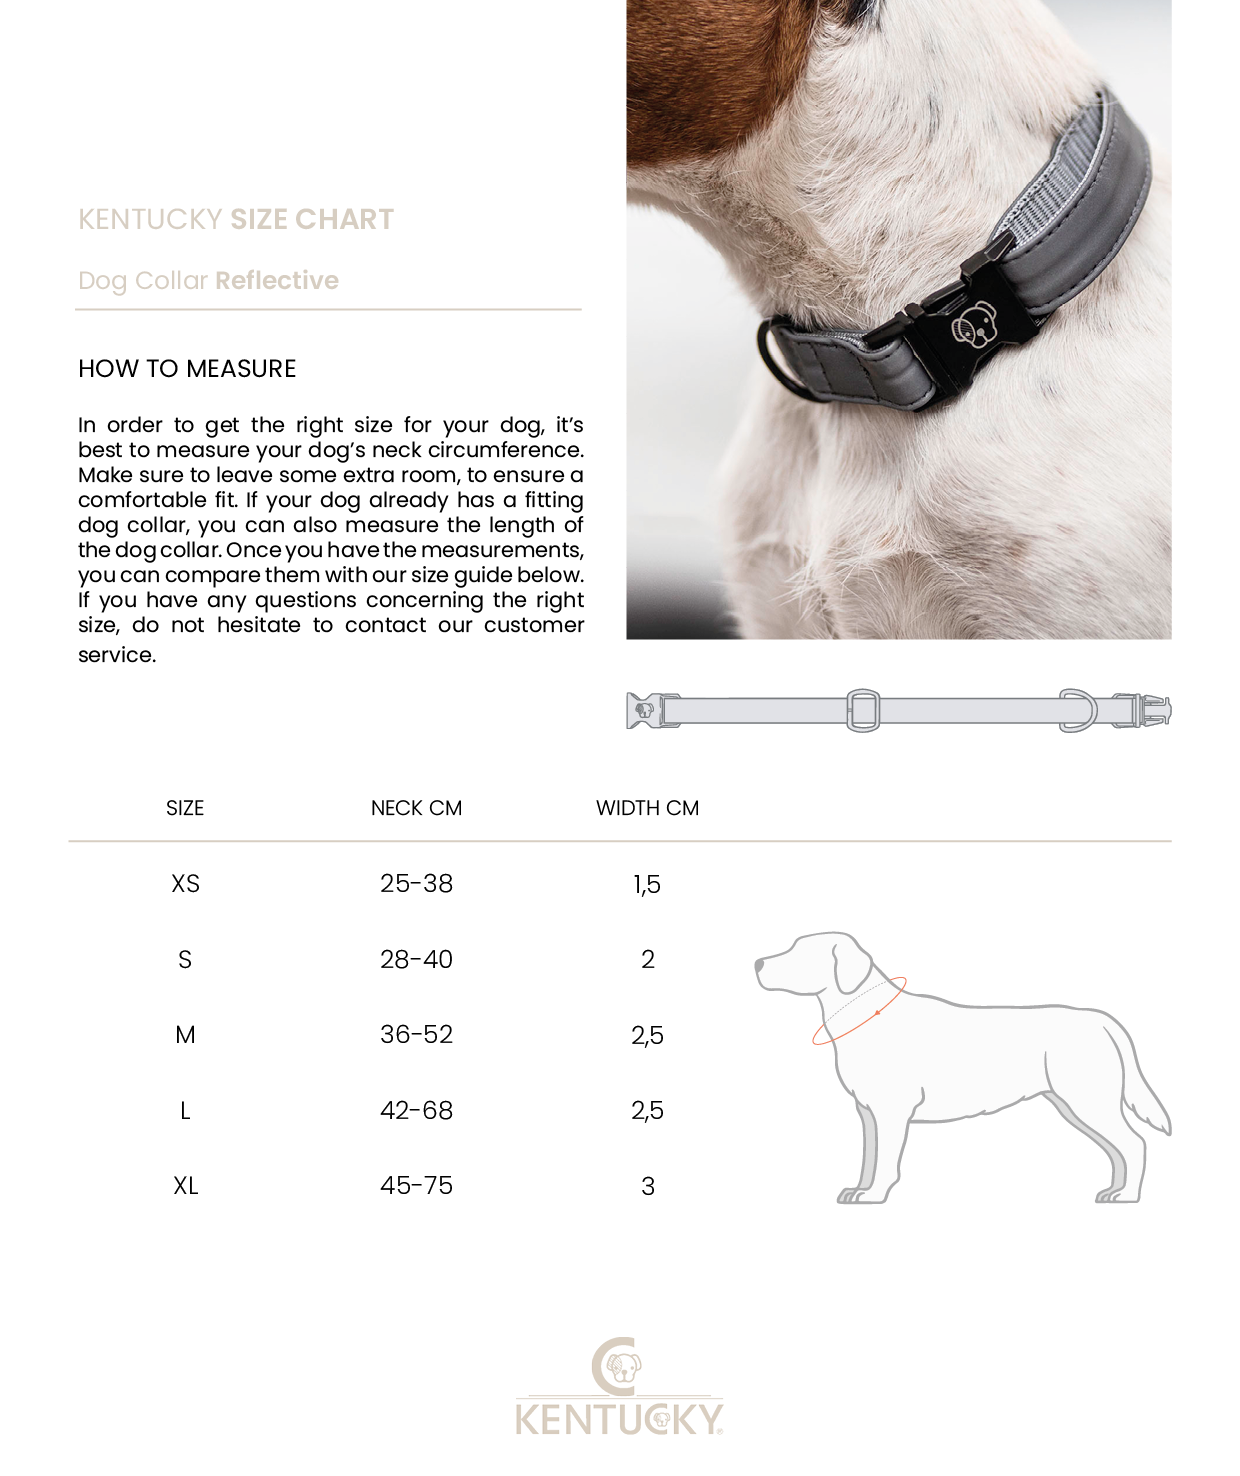  Ensure your dog maximum visibility and safety with the Kentucky Dog Collar Reflective! Strong and comfortable for your dog, this dog collar is 100% reflective while being classy and discrete. The Dog CollarReflective features a ring to attach our matching Dog Lead Reflective . The small hanger with Kentucky Dog Paw logo can be engraved with your details. 